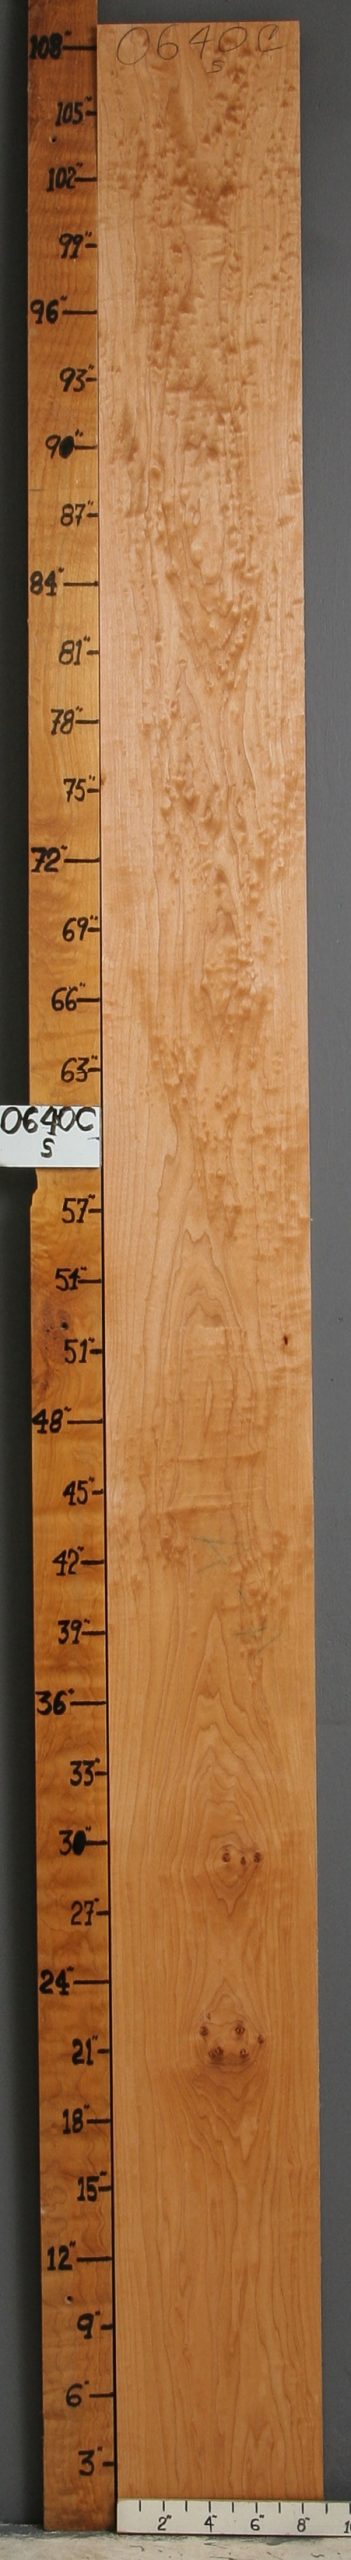 AAAA QUILTED MAPLE LUMBER 8"3/4 X 109" X 4/4 (NWT-0640C)